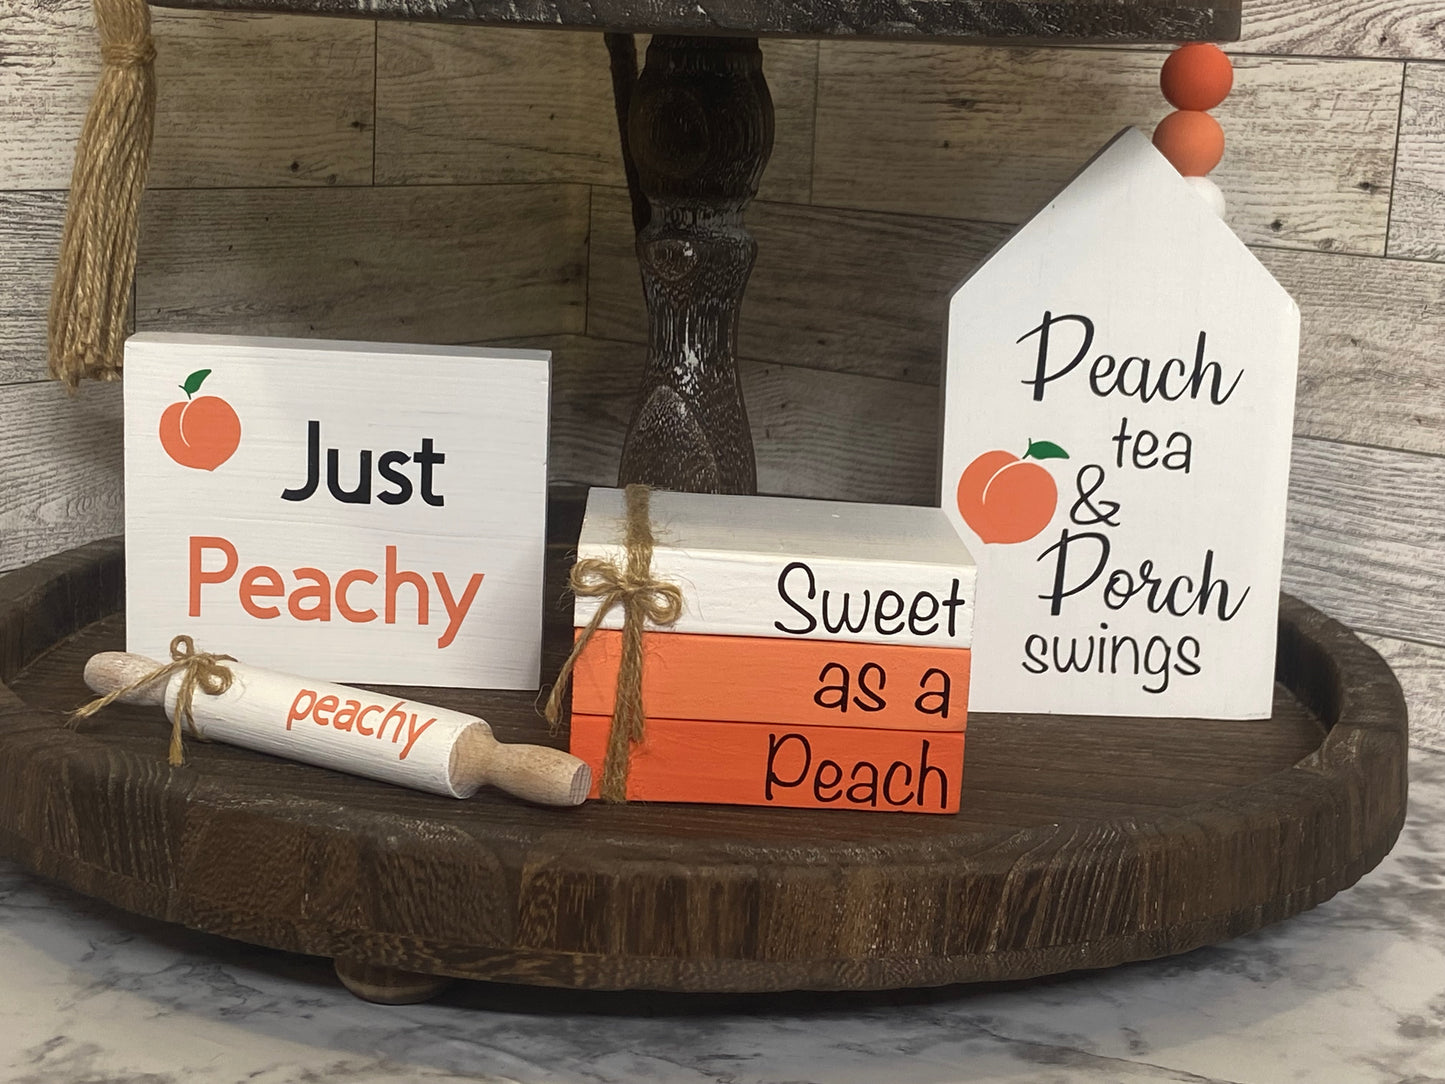 Sweet as a Peach - Medium Tiered Tray Book Stack